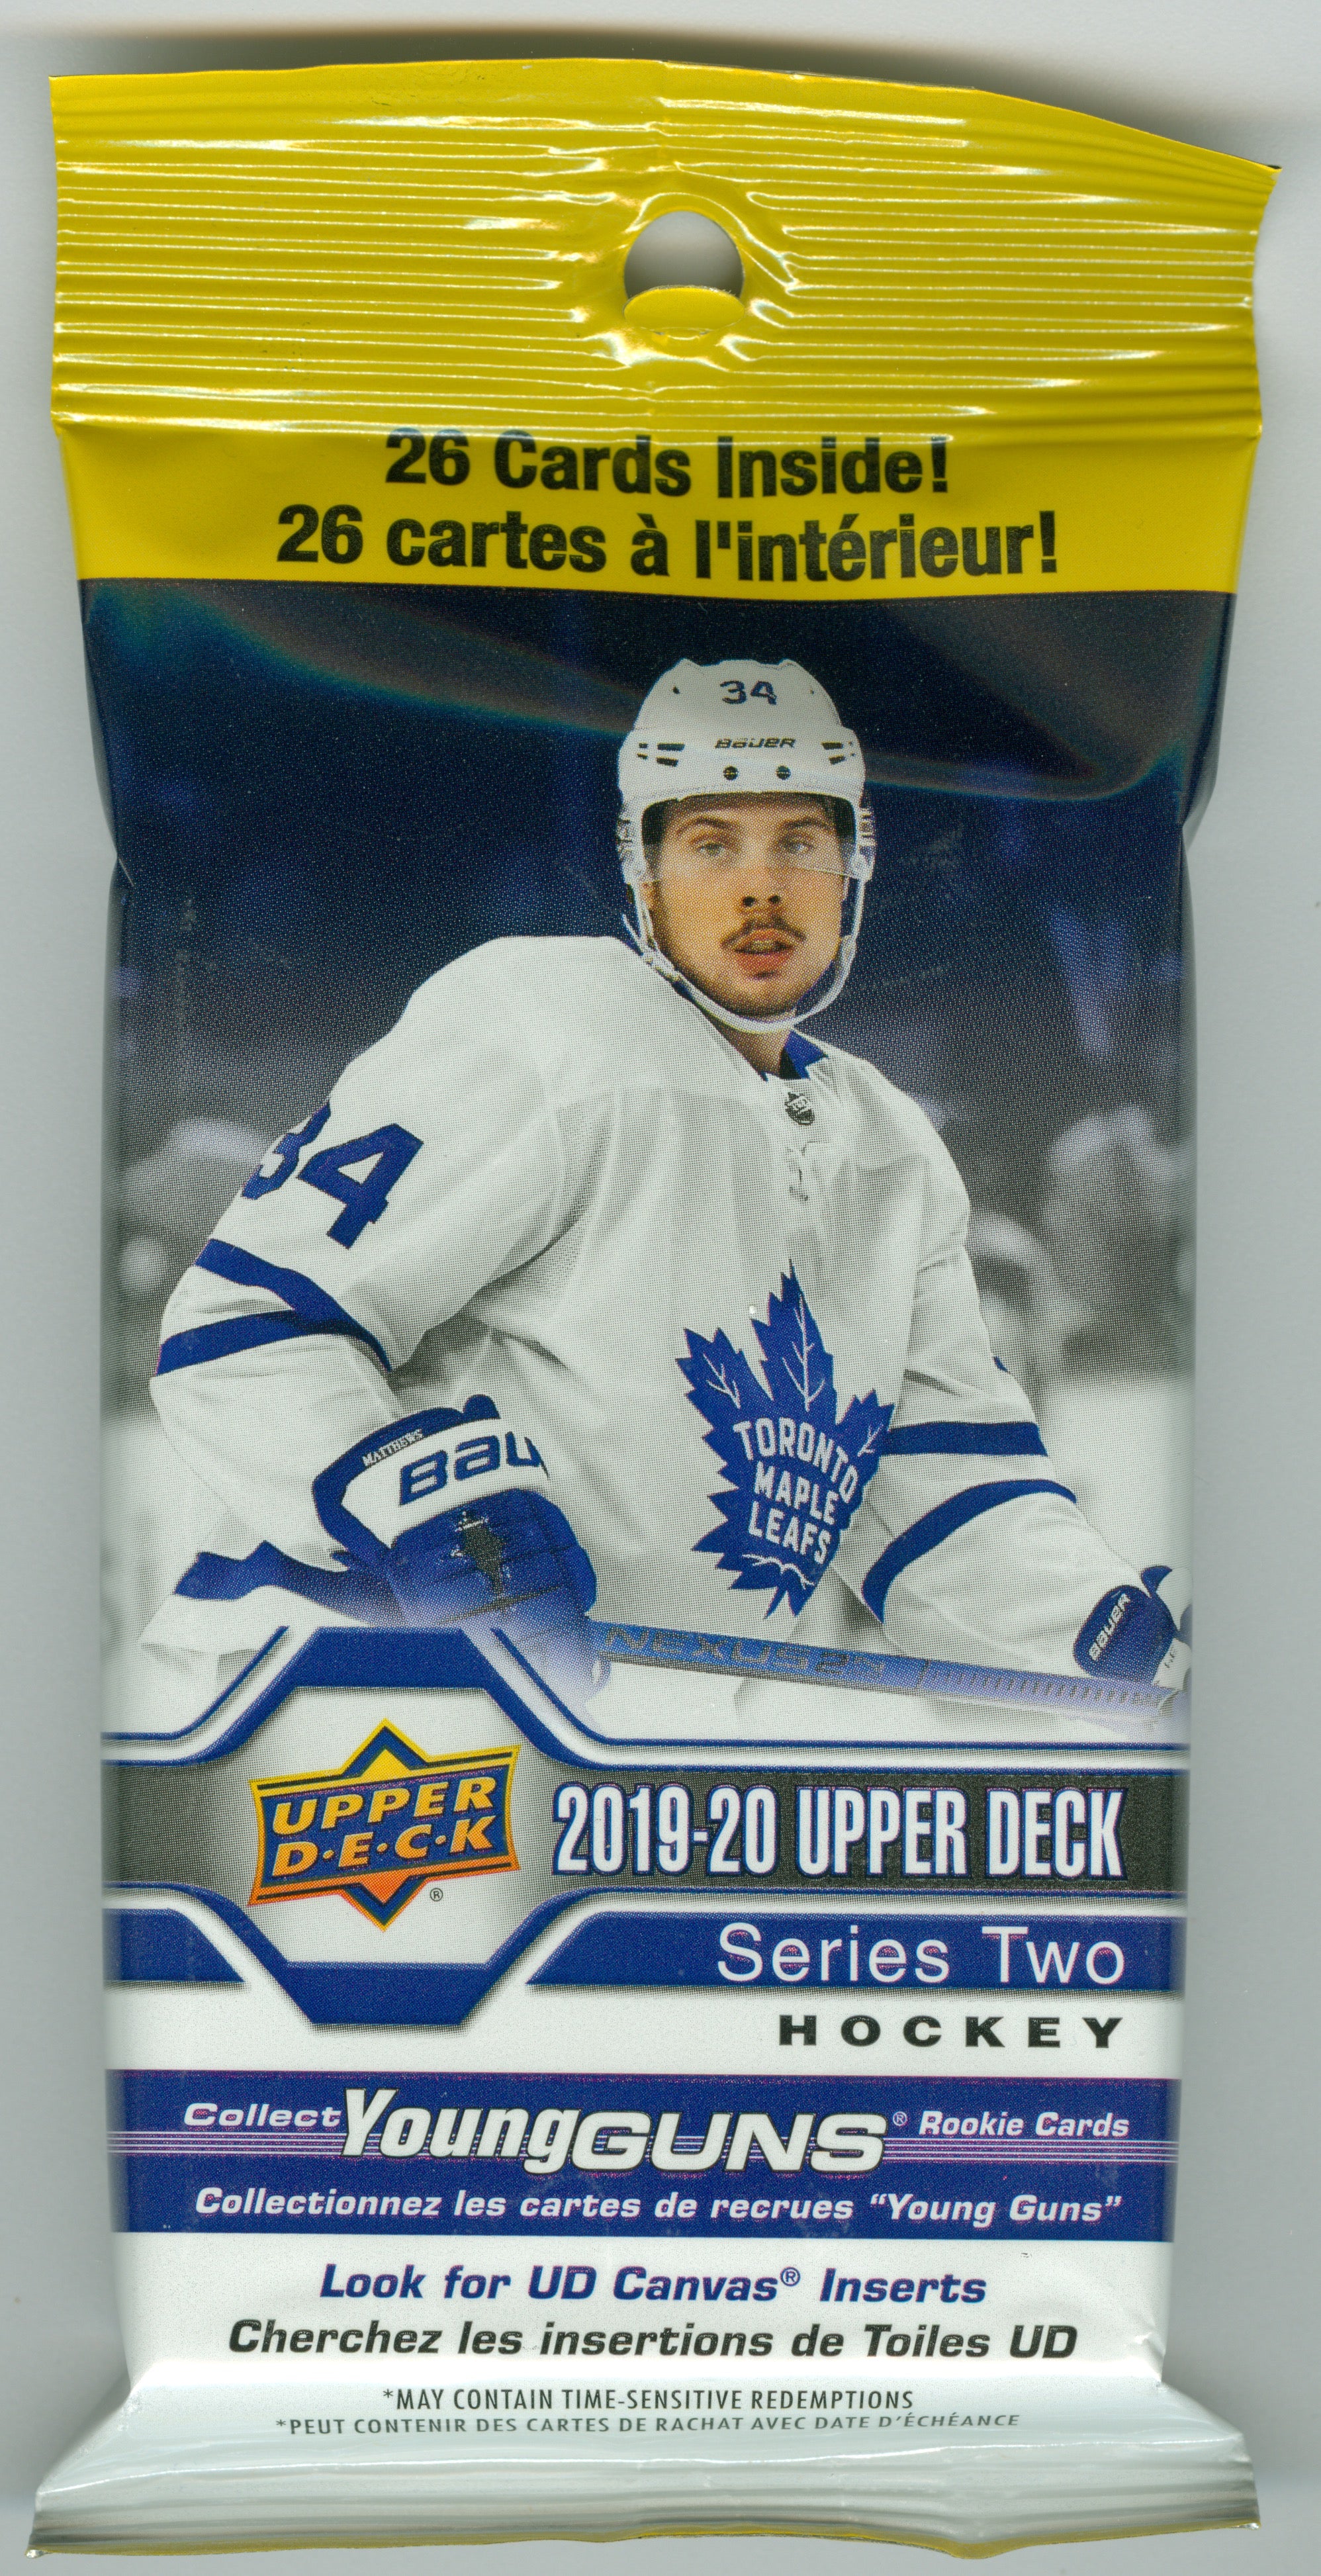 2019-20 Upper Deck Series 2 Retail Fat Pack | Eastridge Sports Cards